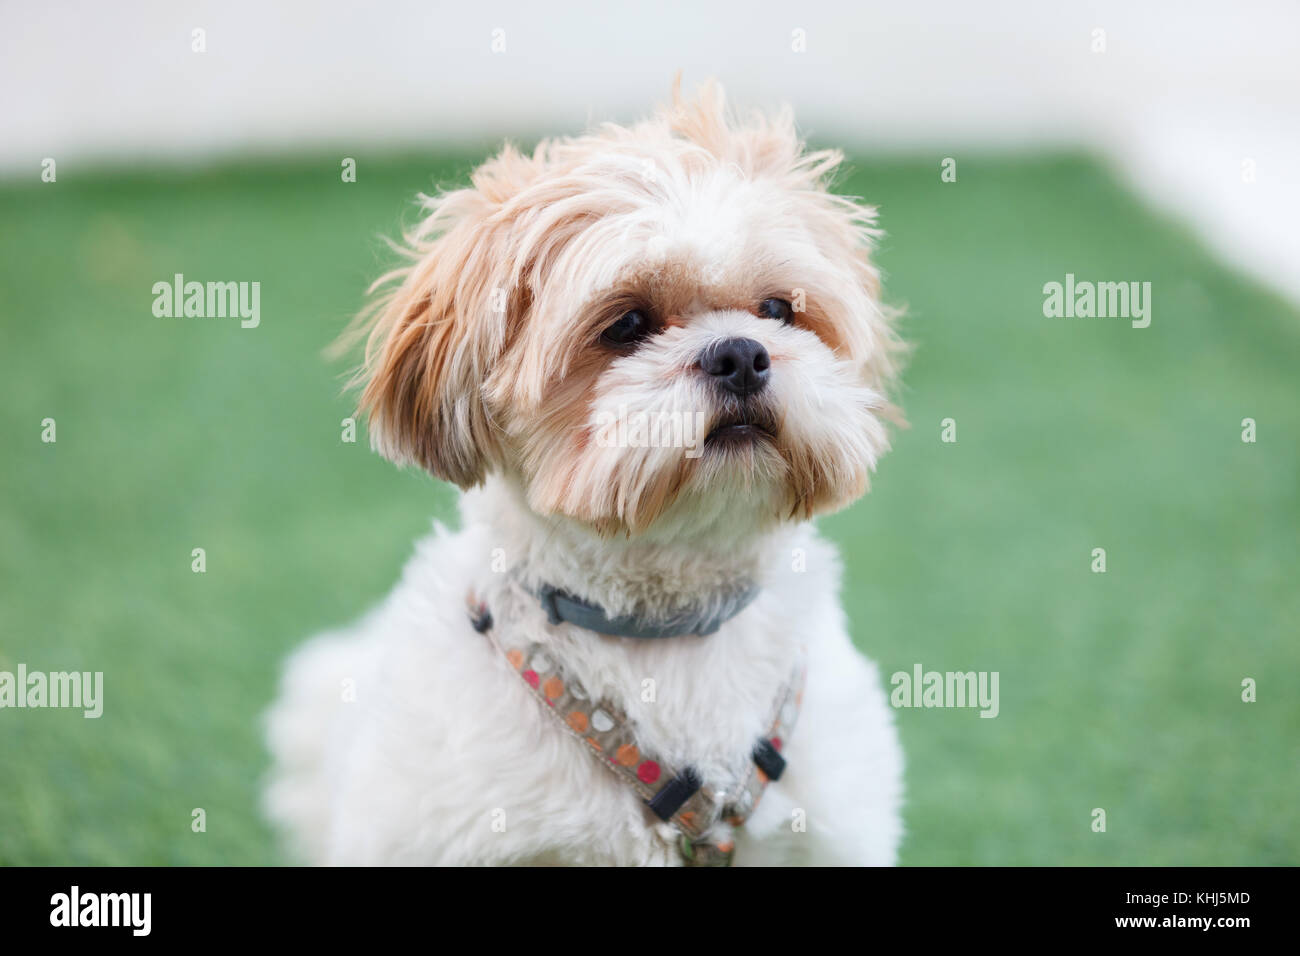 Portrait Of A Adorable Shih Tzu Dog With A Funny Face Stock Photo